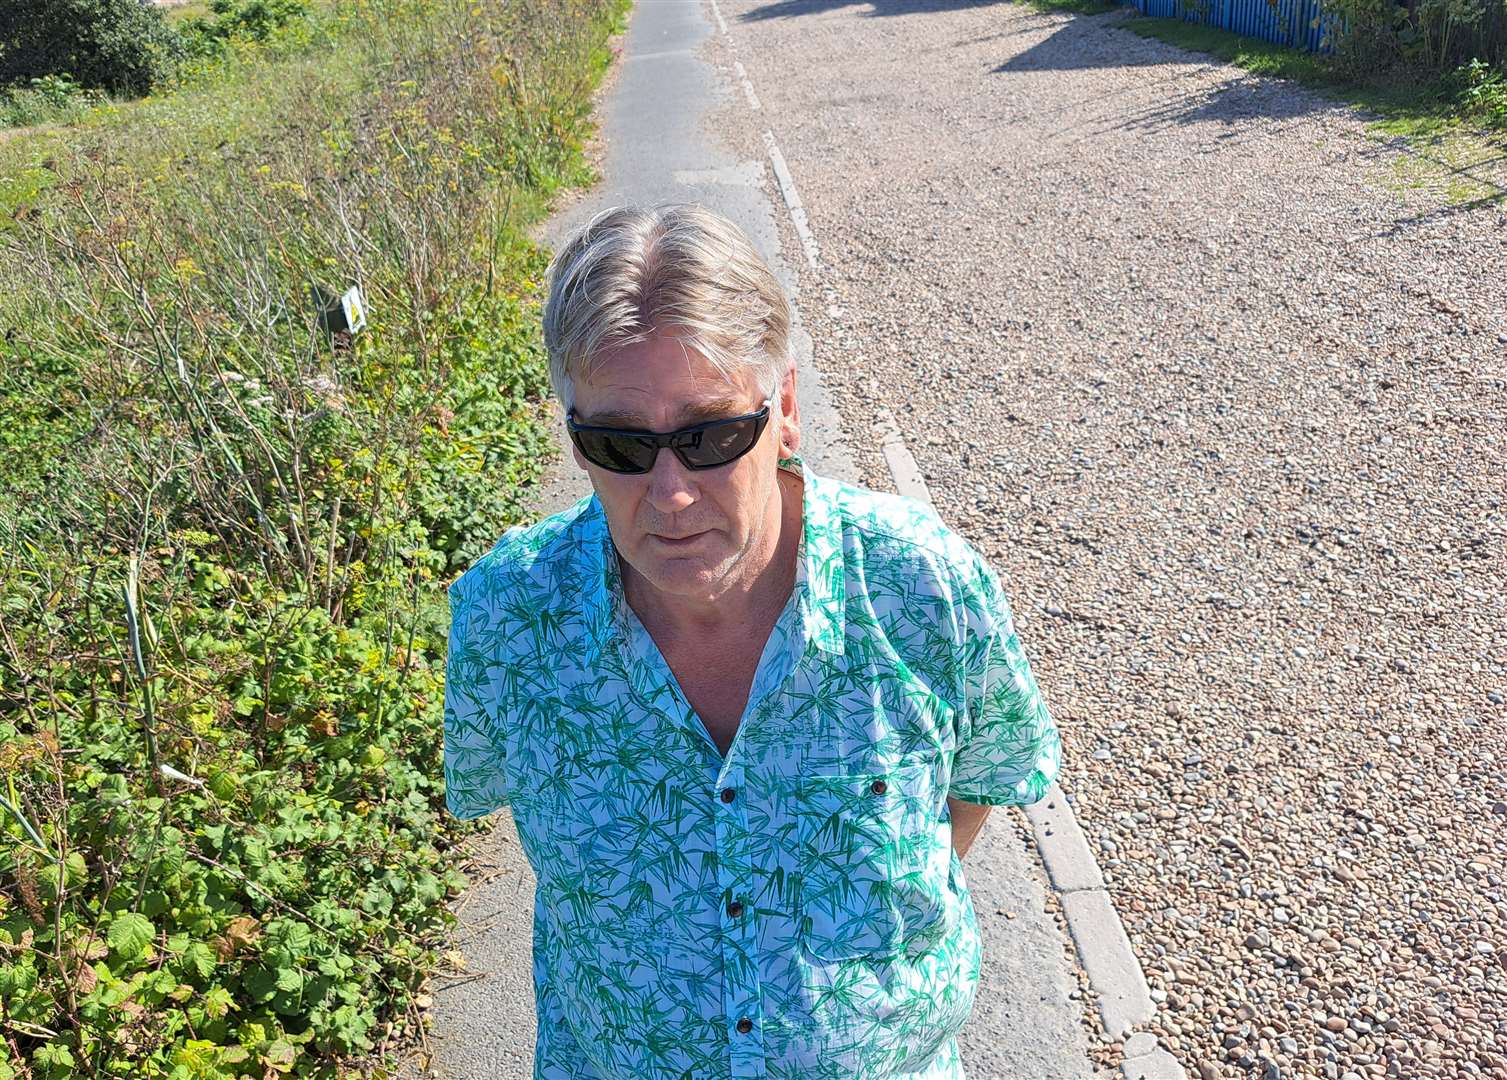 Neil Oldfield says the path is too narrow for bicycles and pedestrians